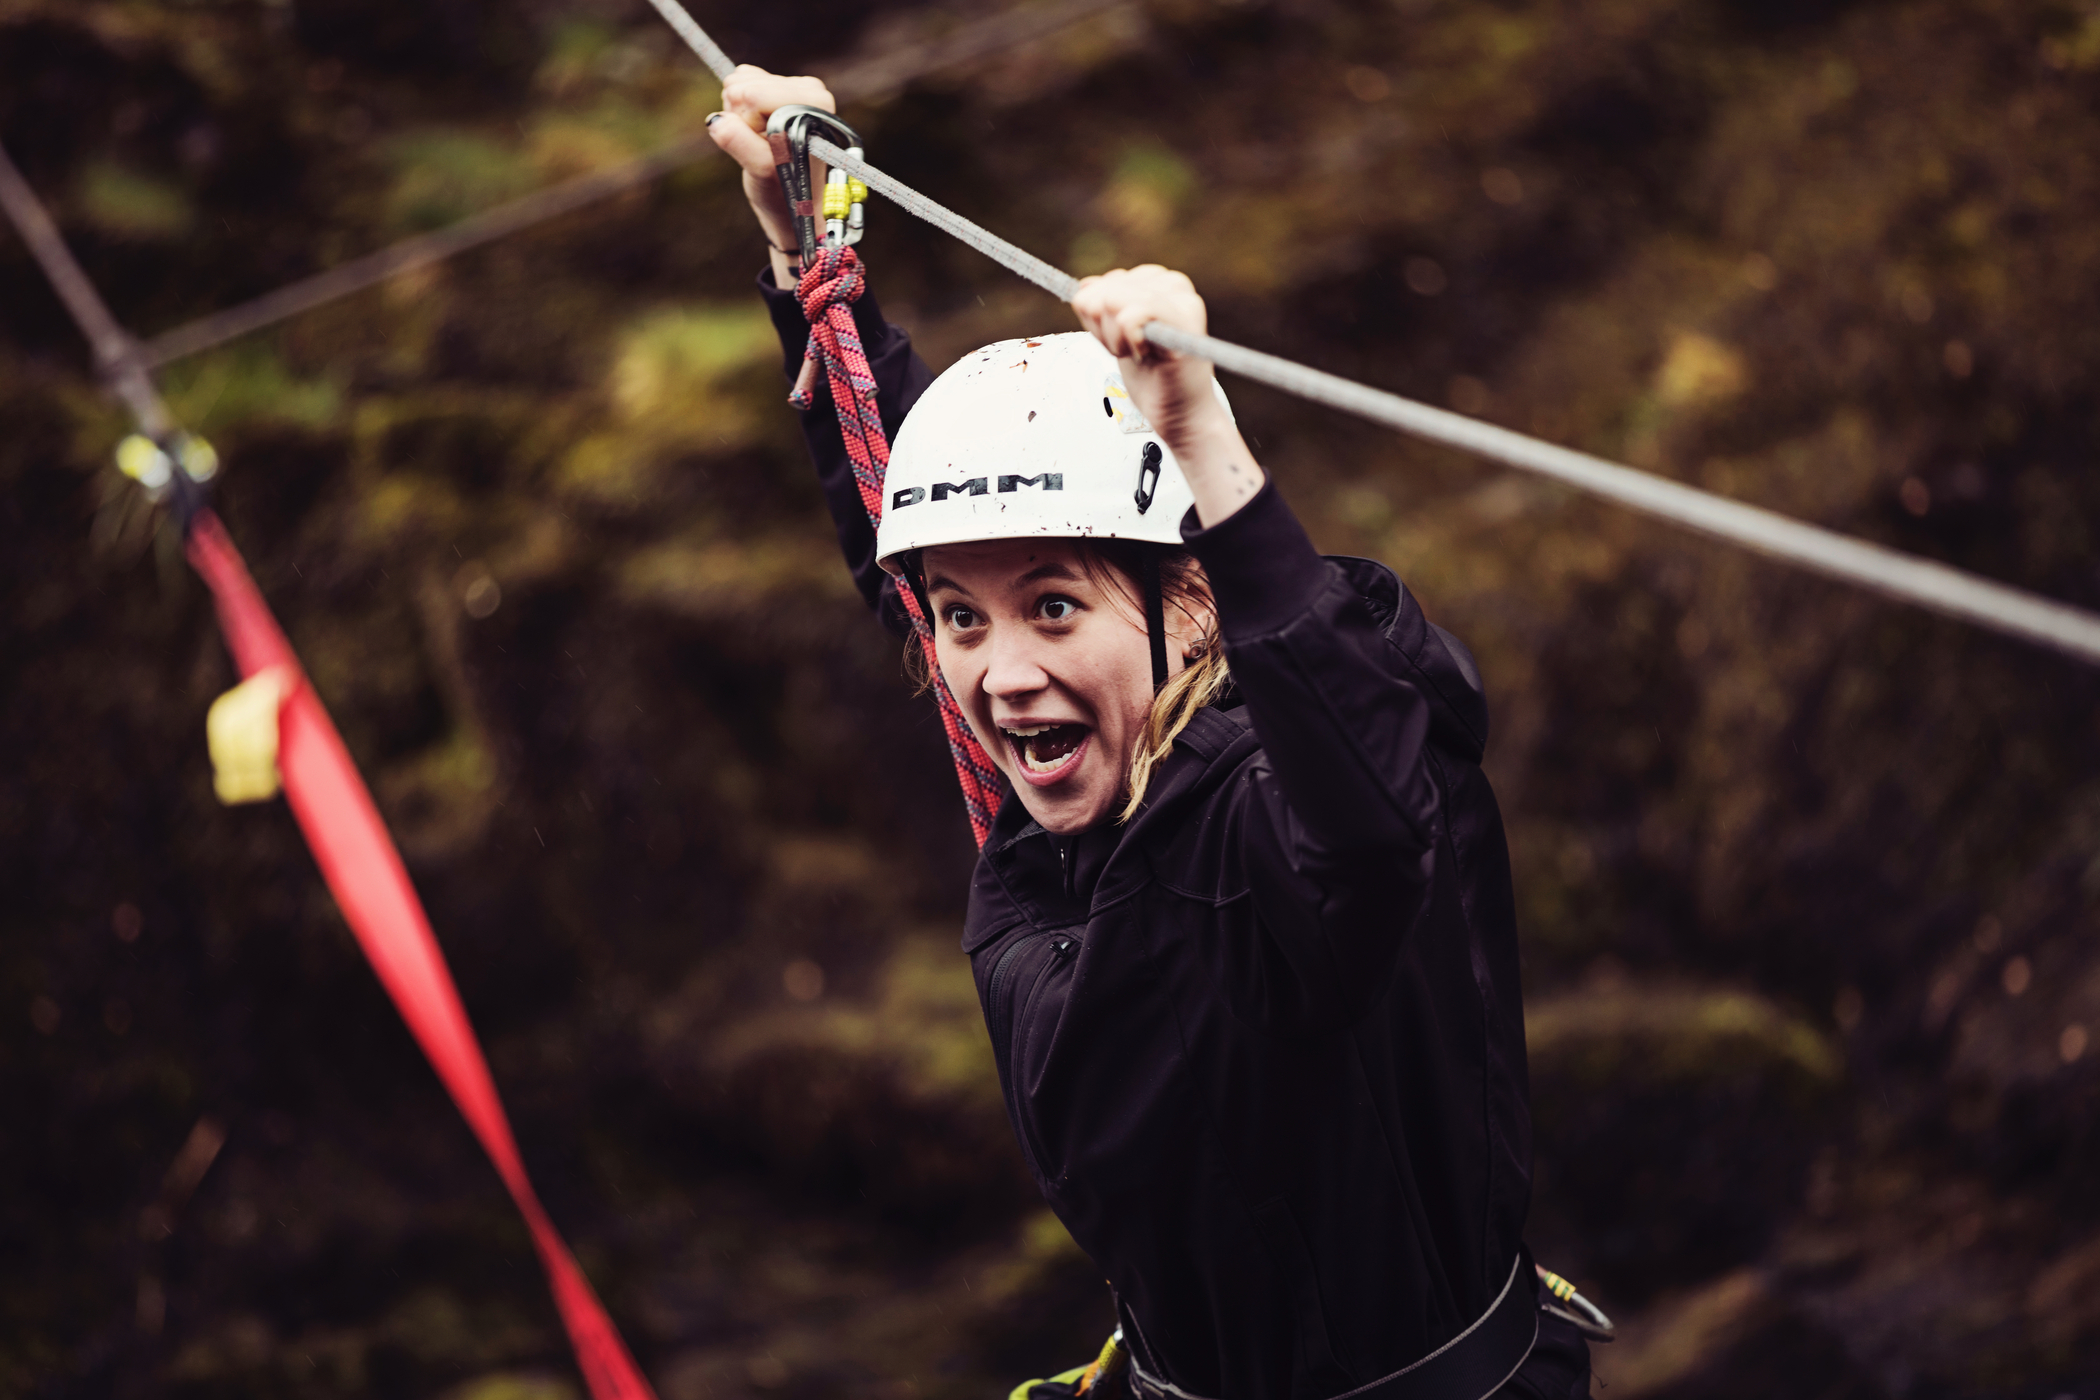 BA (Hons) Outdoor Leadership (with Integrated Foundation Year)